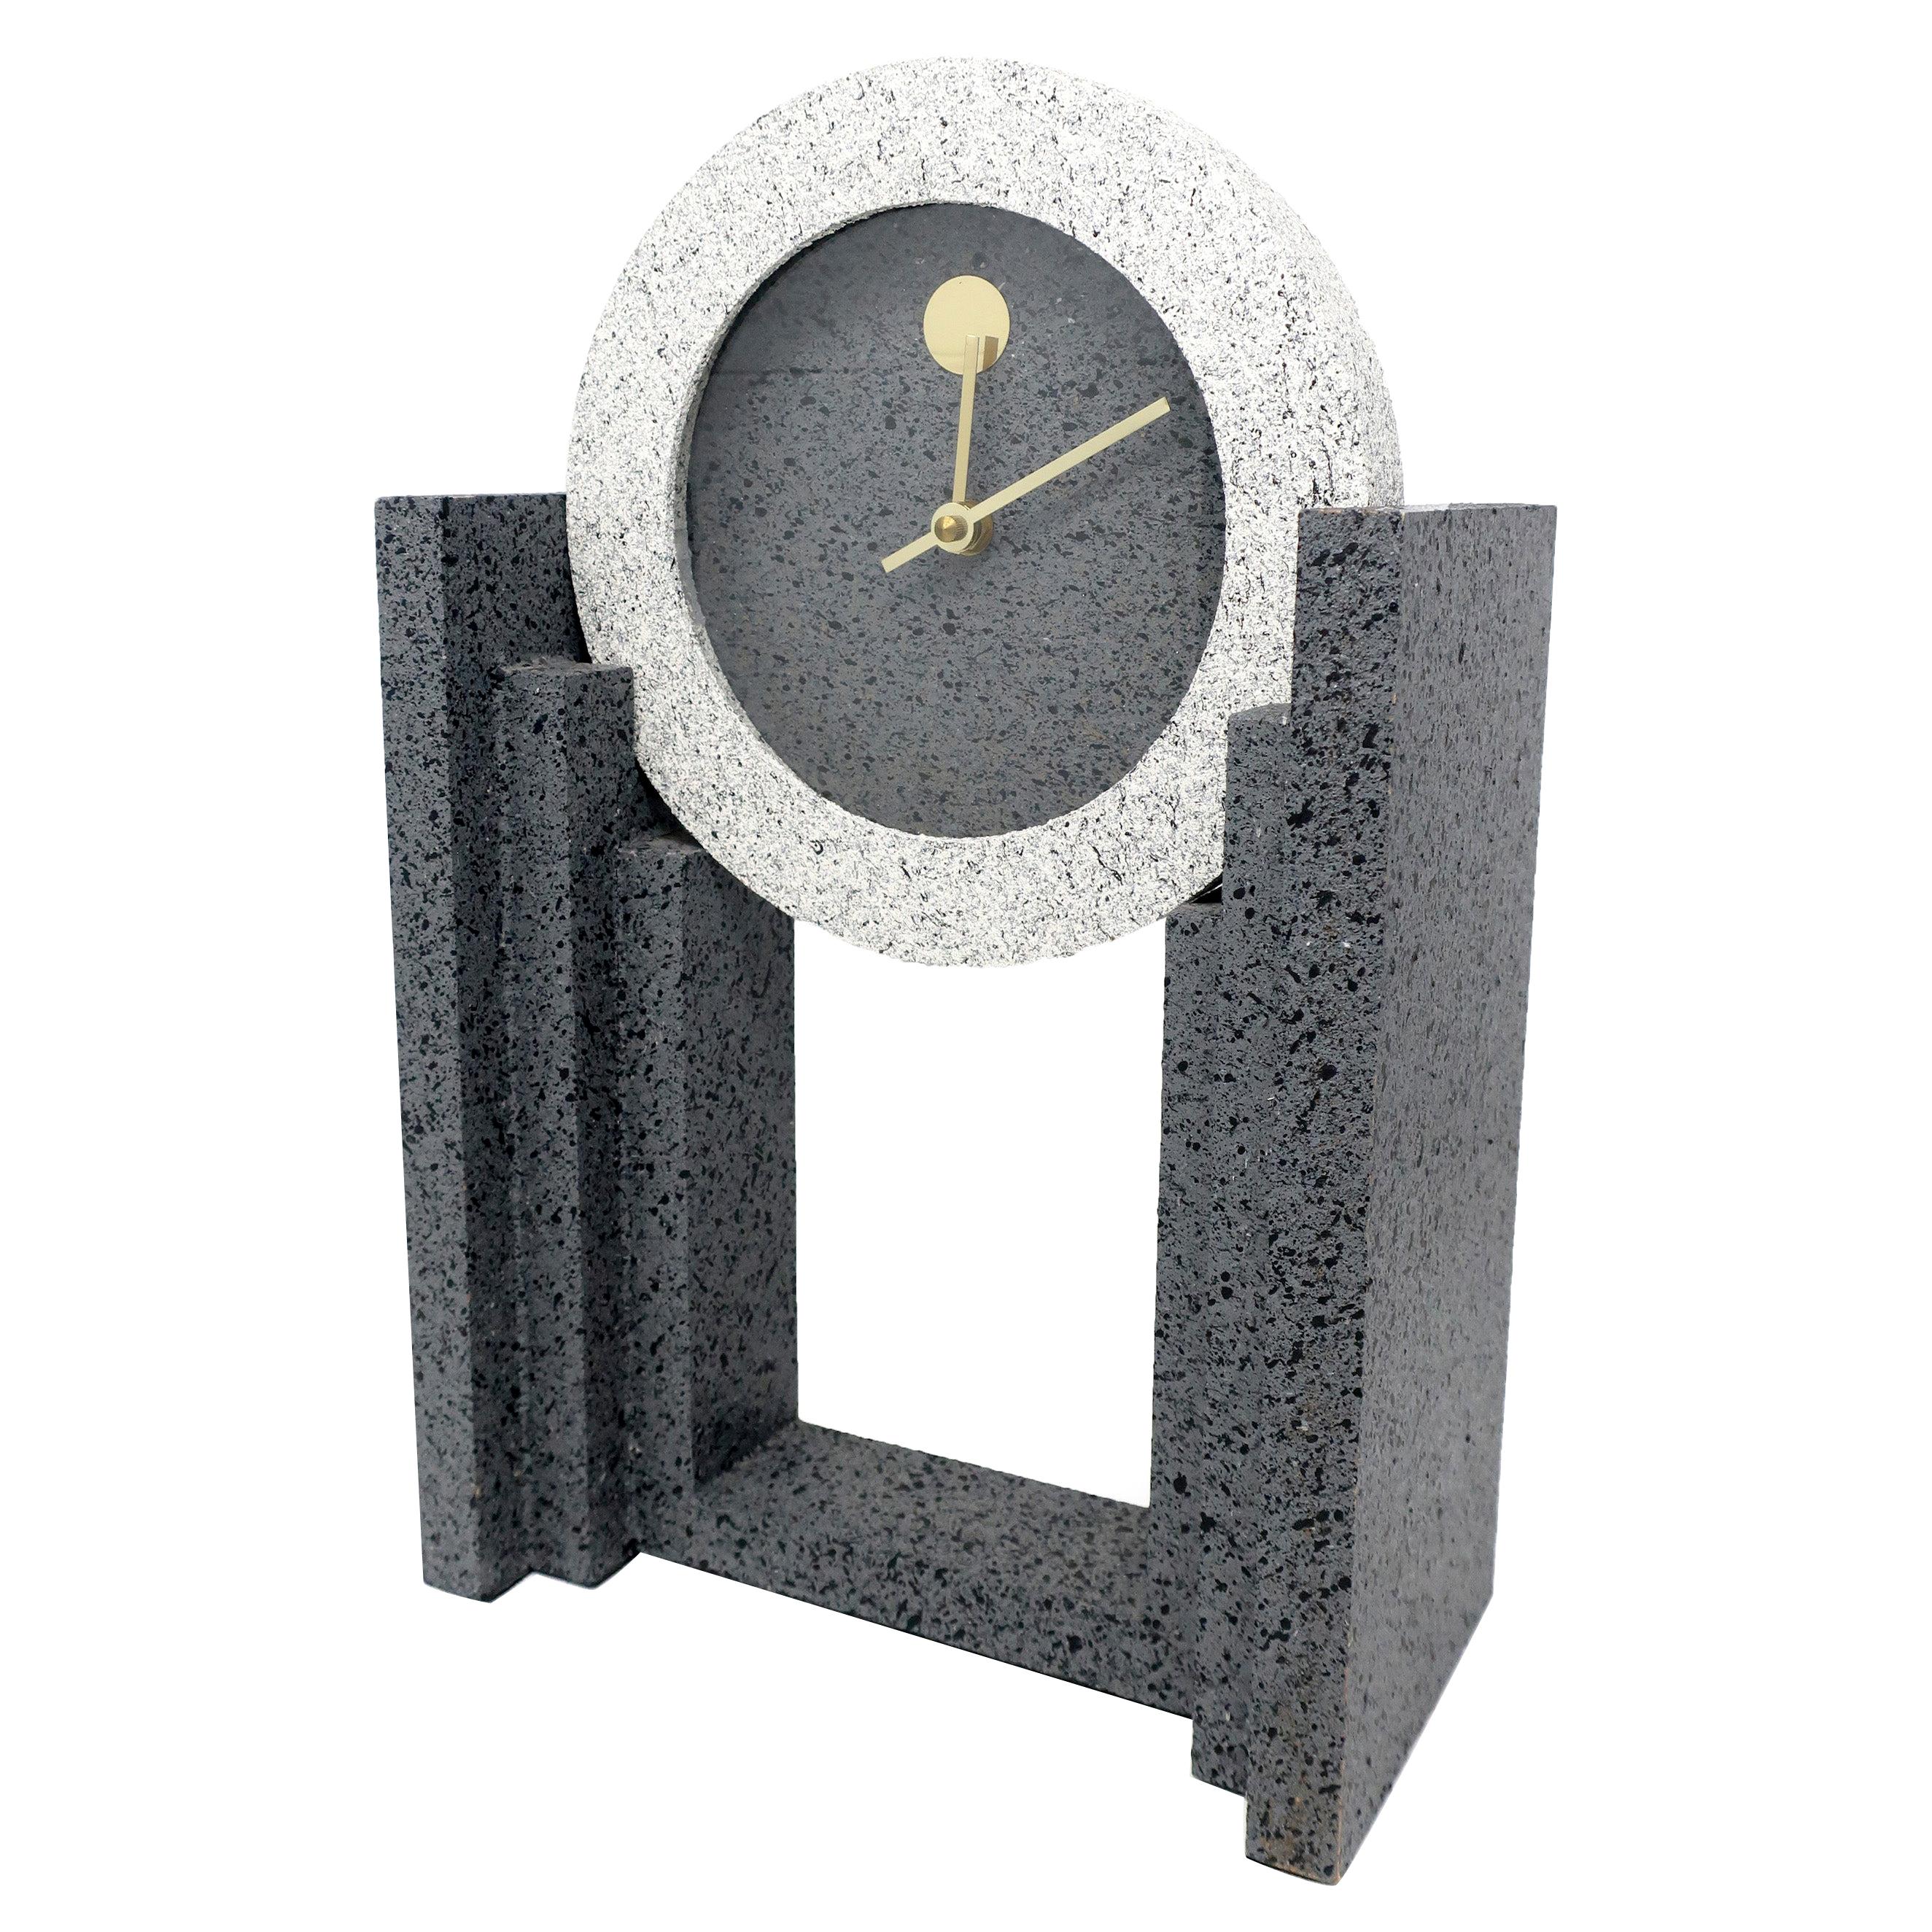 1980s Post Modern Mantle Clock by Empire Arts